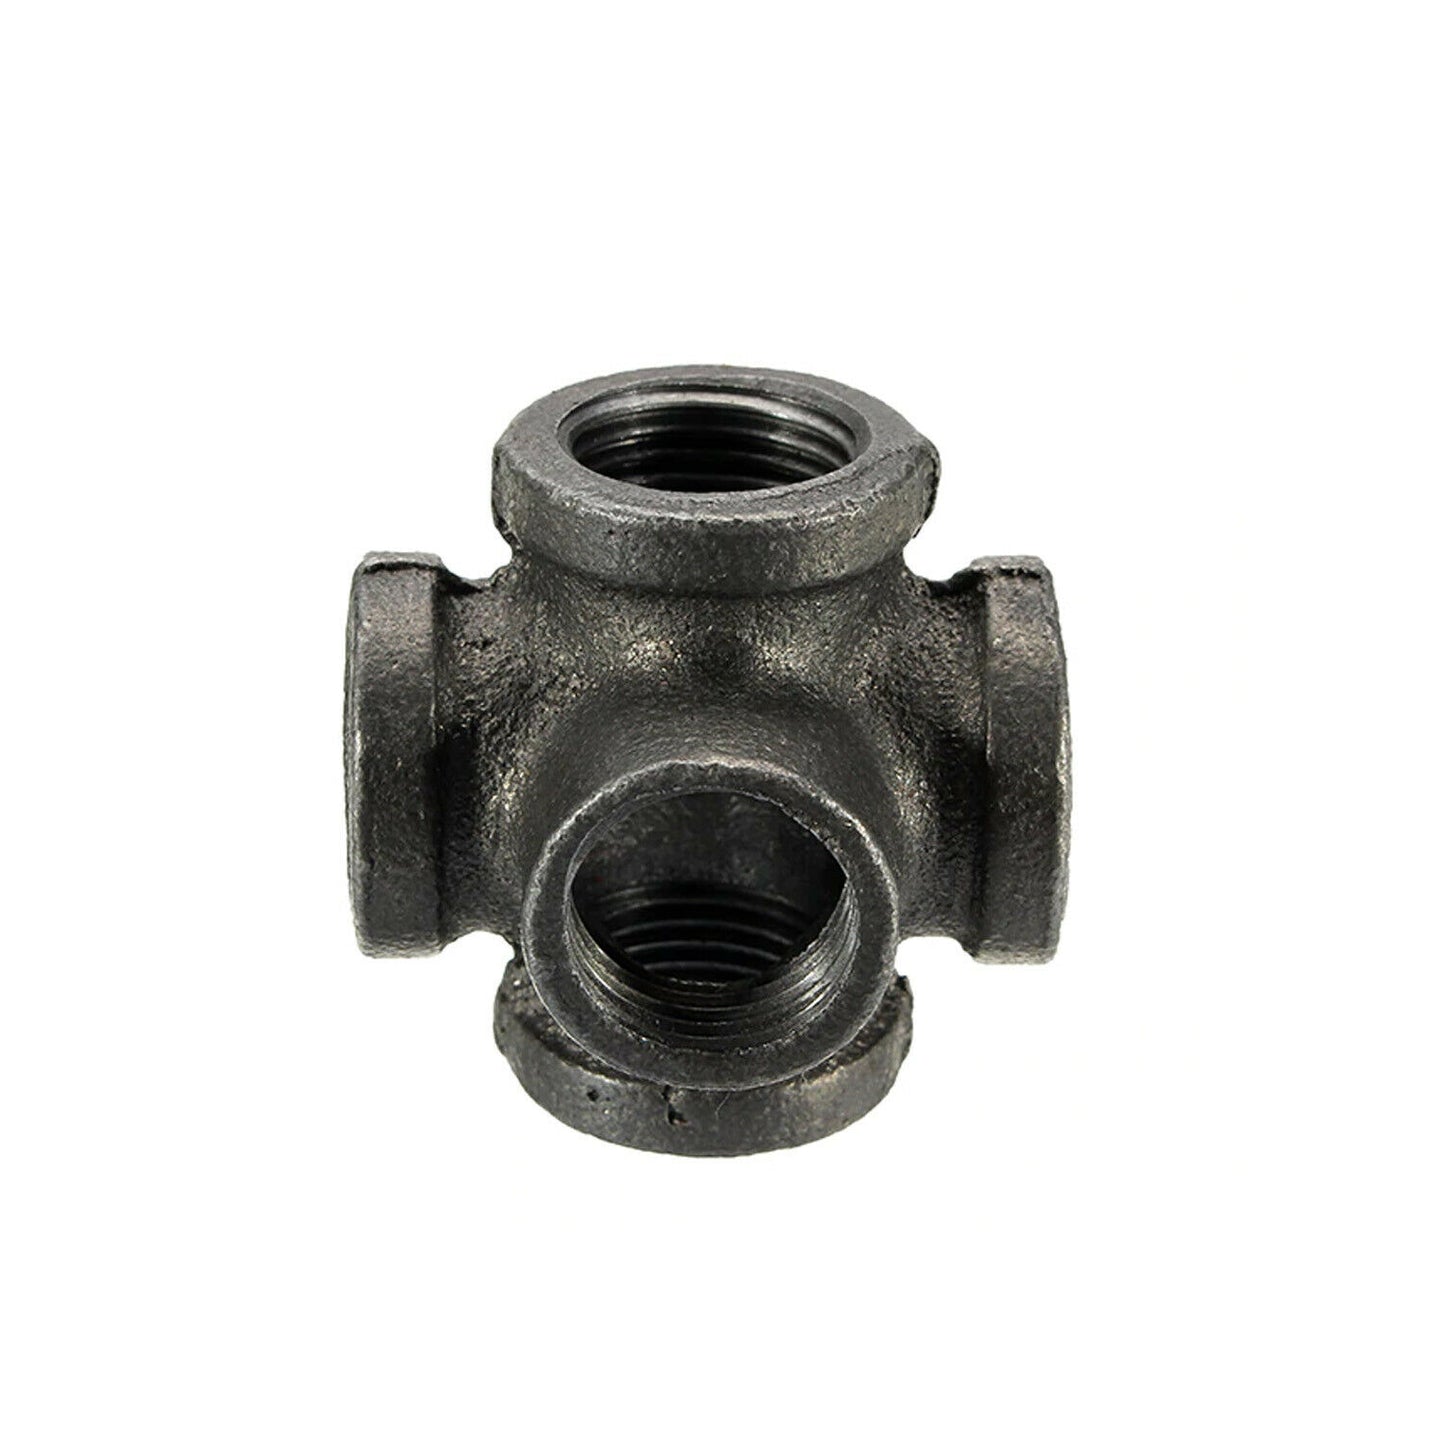 INDUSTRIAL MALLEABLE Metal PIPE FITTINGS CONNECTORS JOINTS 3/4" INCH~1876